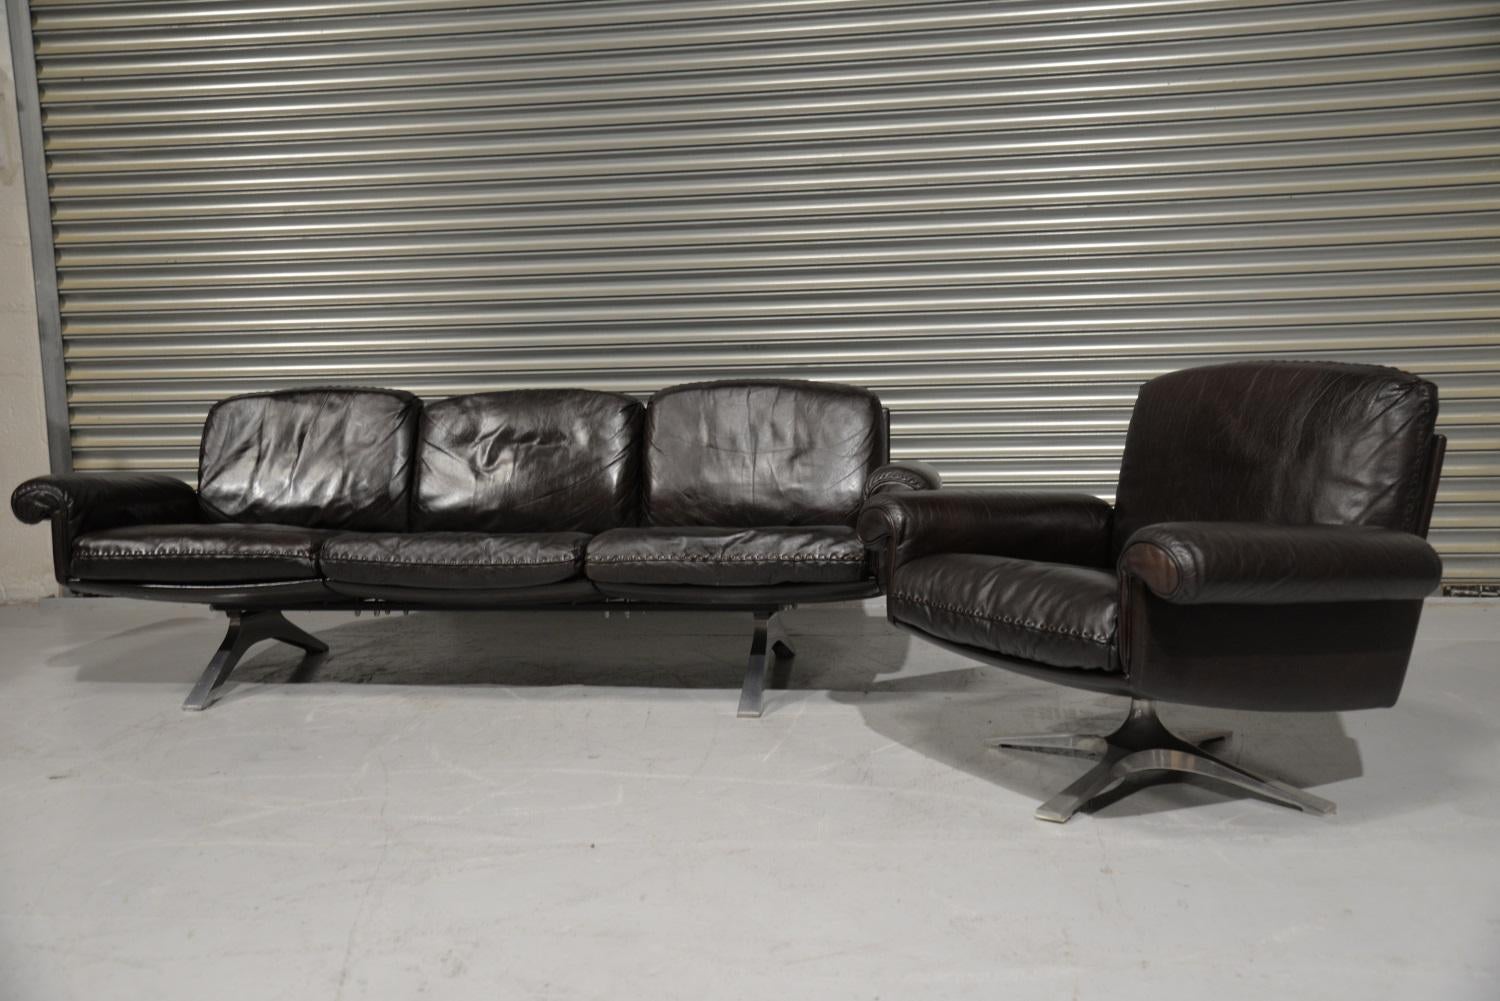 We are delighted to bring to you a Vintage de Sede DS 31 three-seat sofa and swivel lounge armchair. Built in the 1970s by De Sede craftsman from Switzerland these pieces are in beautiful soft dark aniline leather with superb whipstitch edge detail.